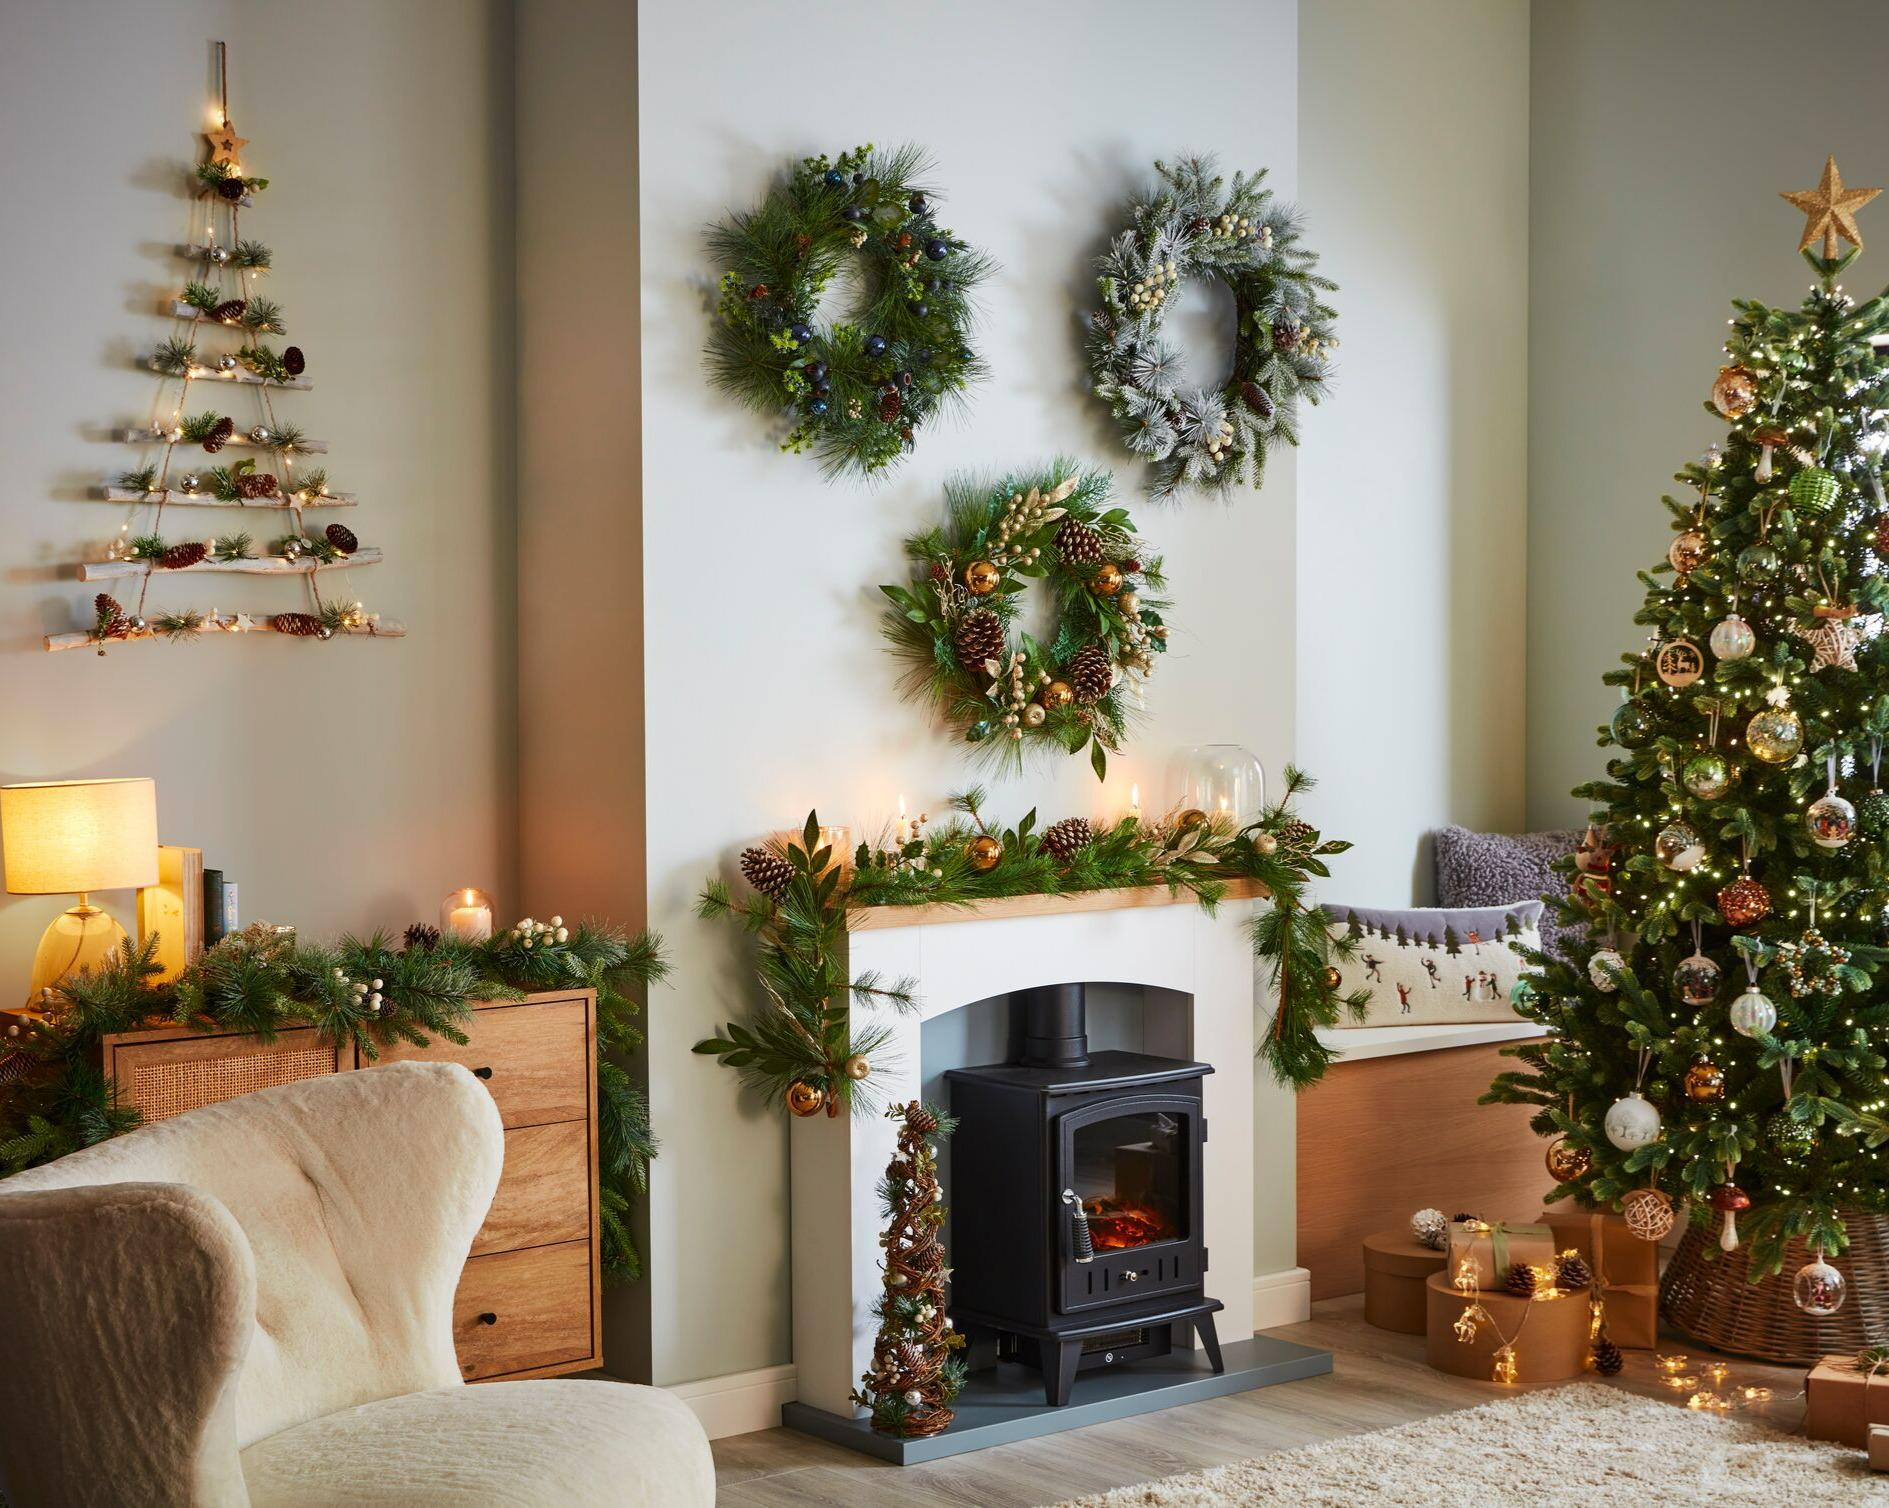 A living room adorned with Christmas decorations including wreaths & garlands